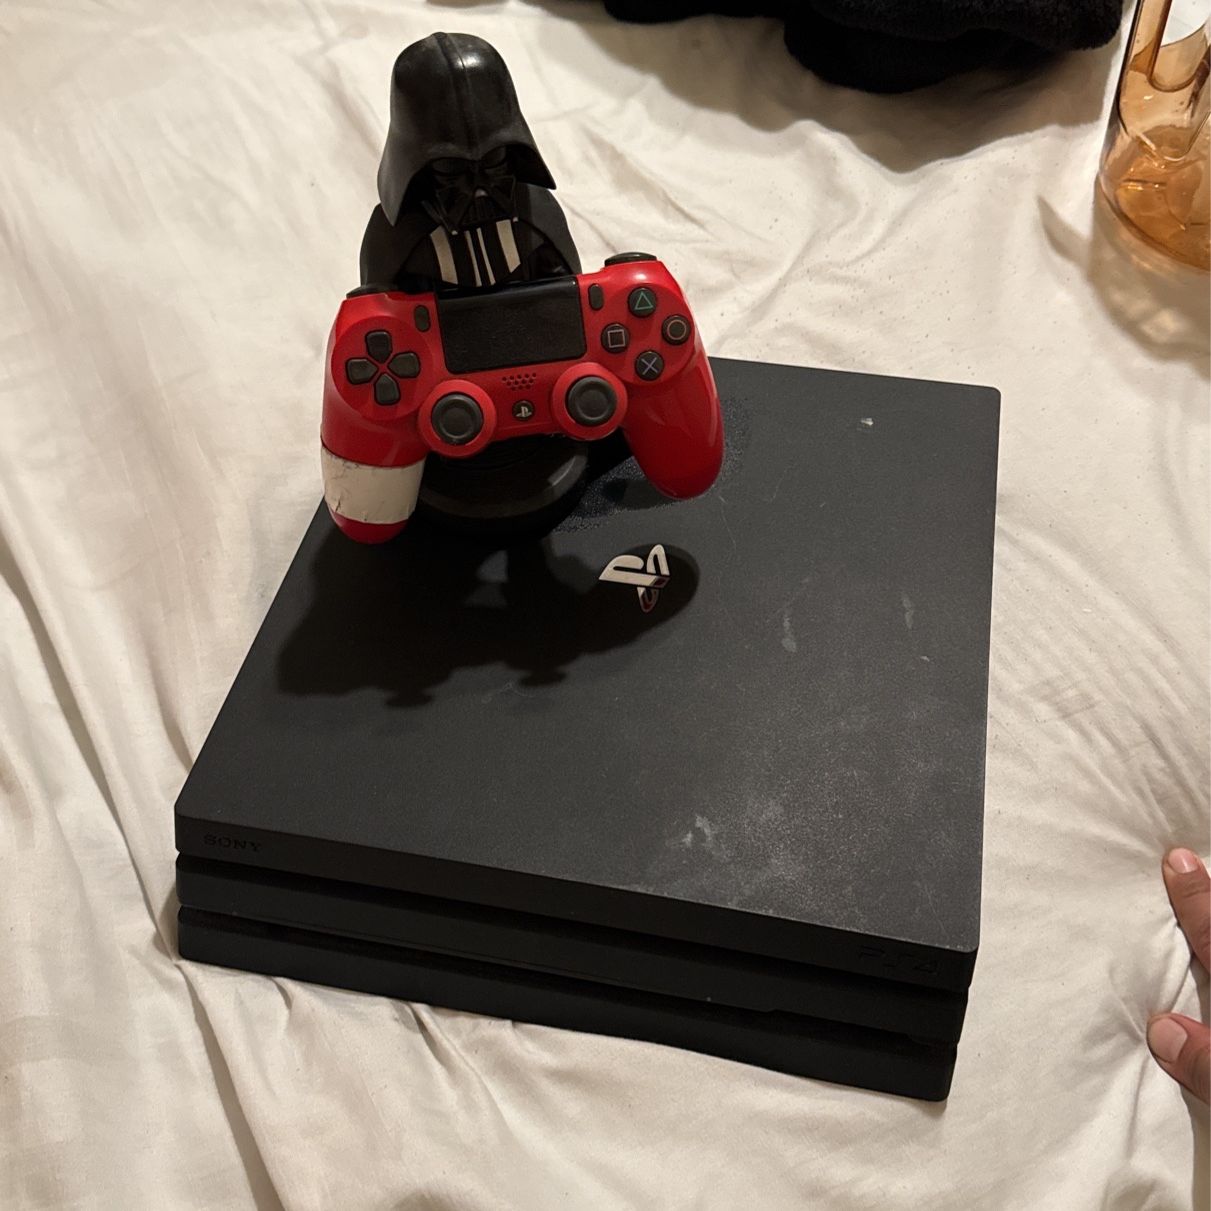 PS4 Pro 1tb + Controller $200 OBO